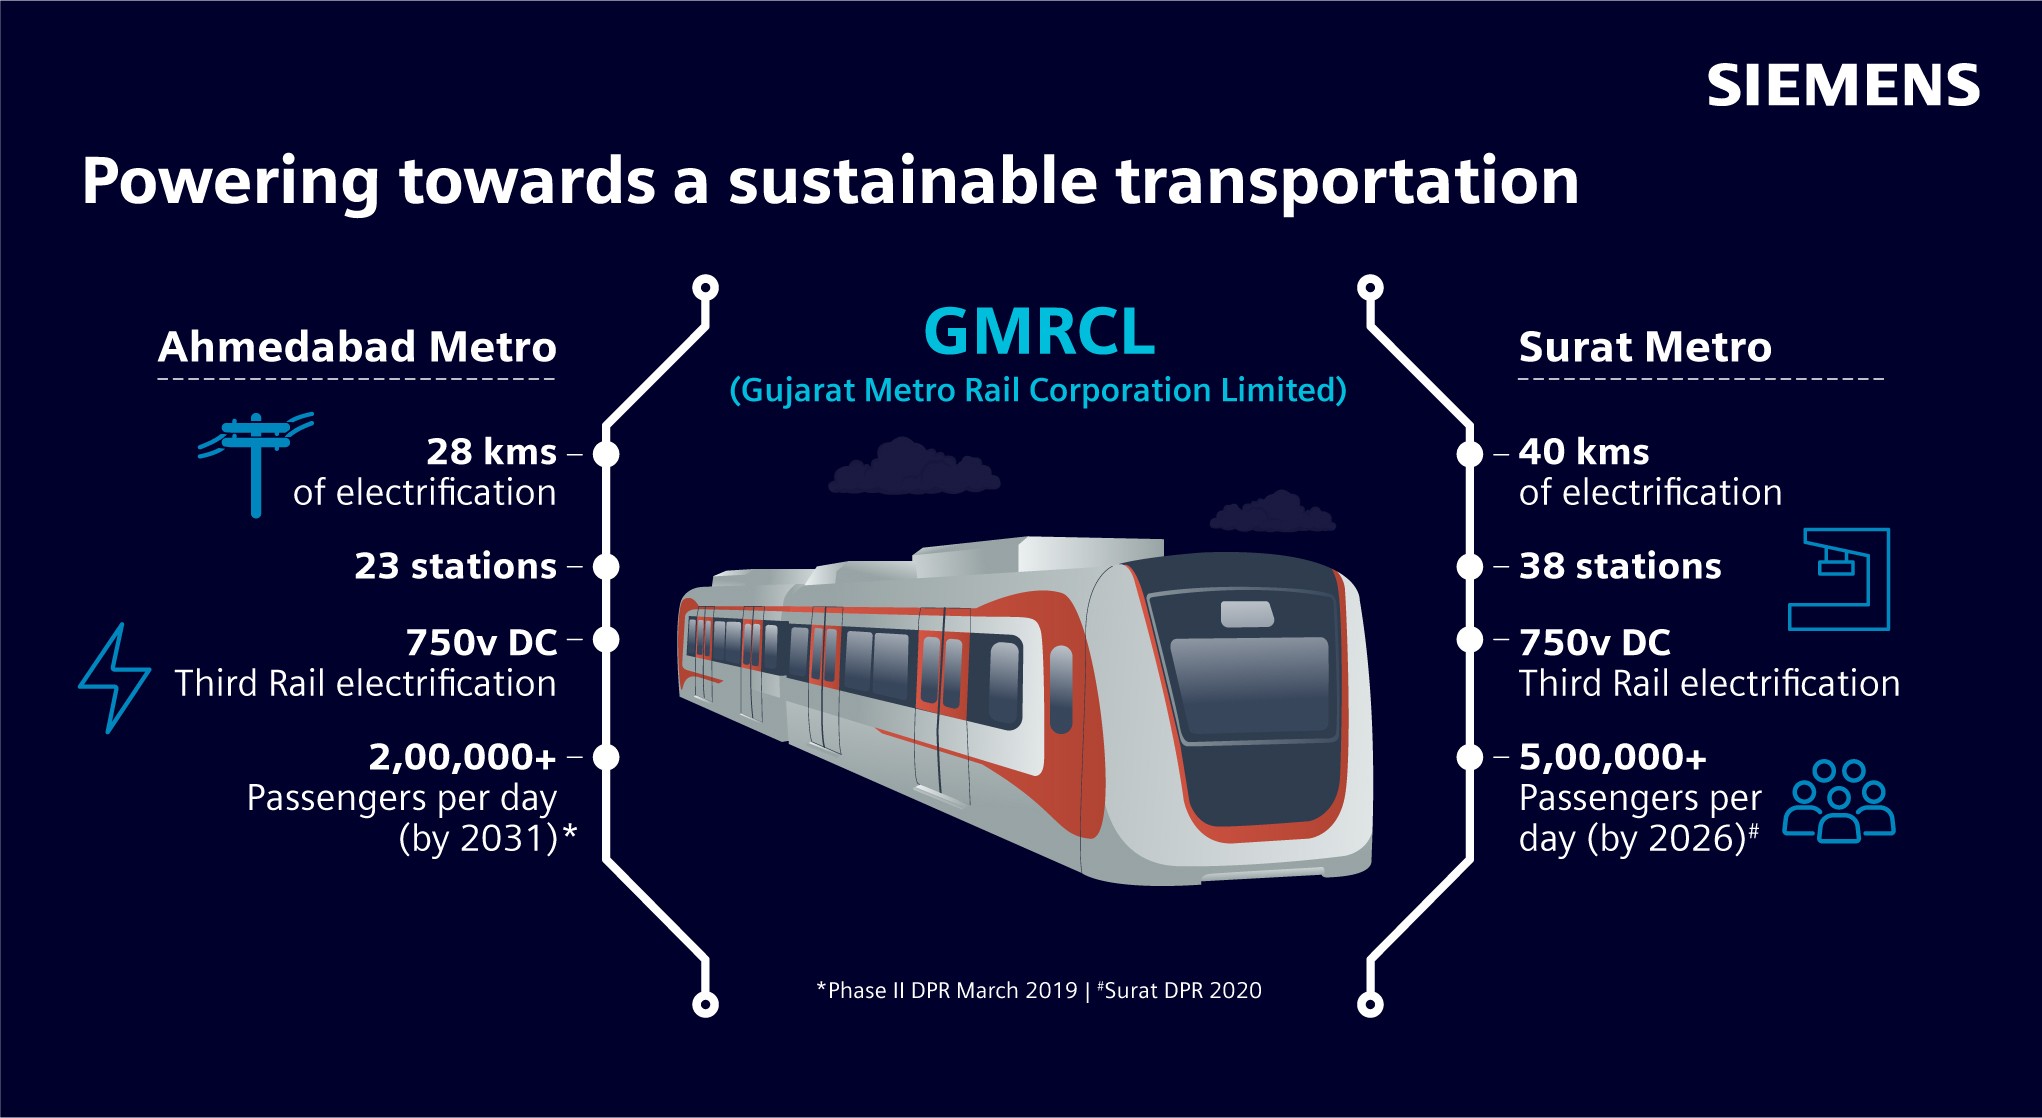 Contracts include state-of-the-art rail electrification technologies for the Ahmedabad Metro Phase 2 and the Surat Metro Phase 1